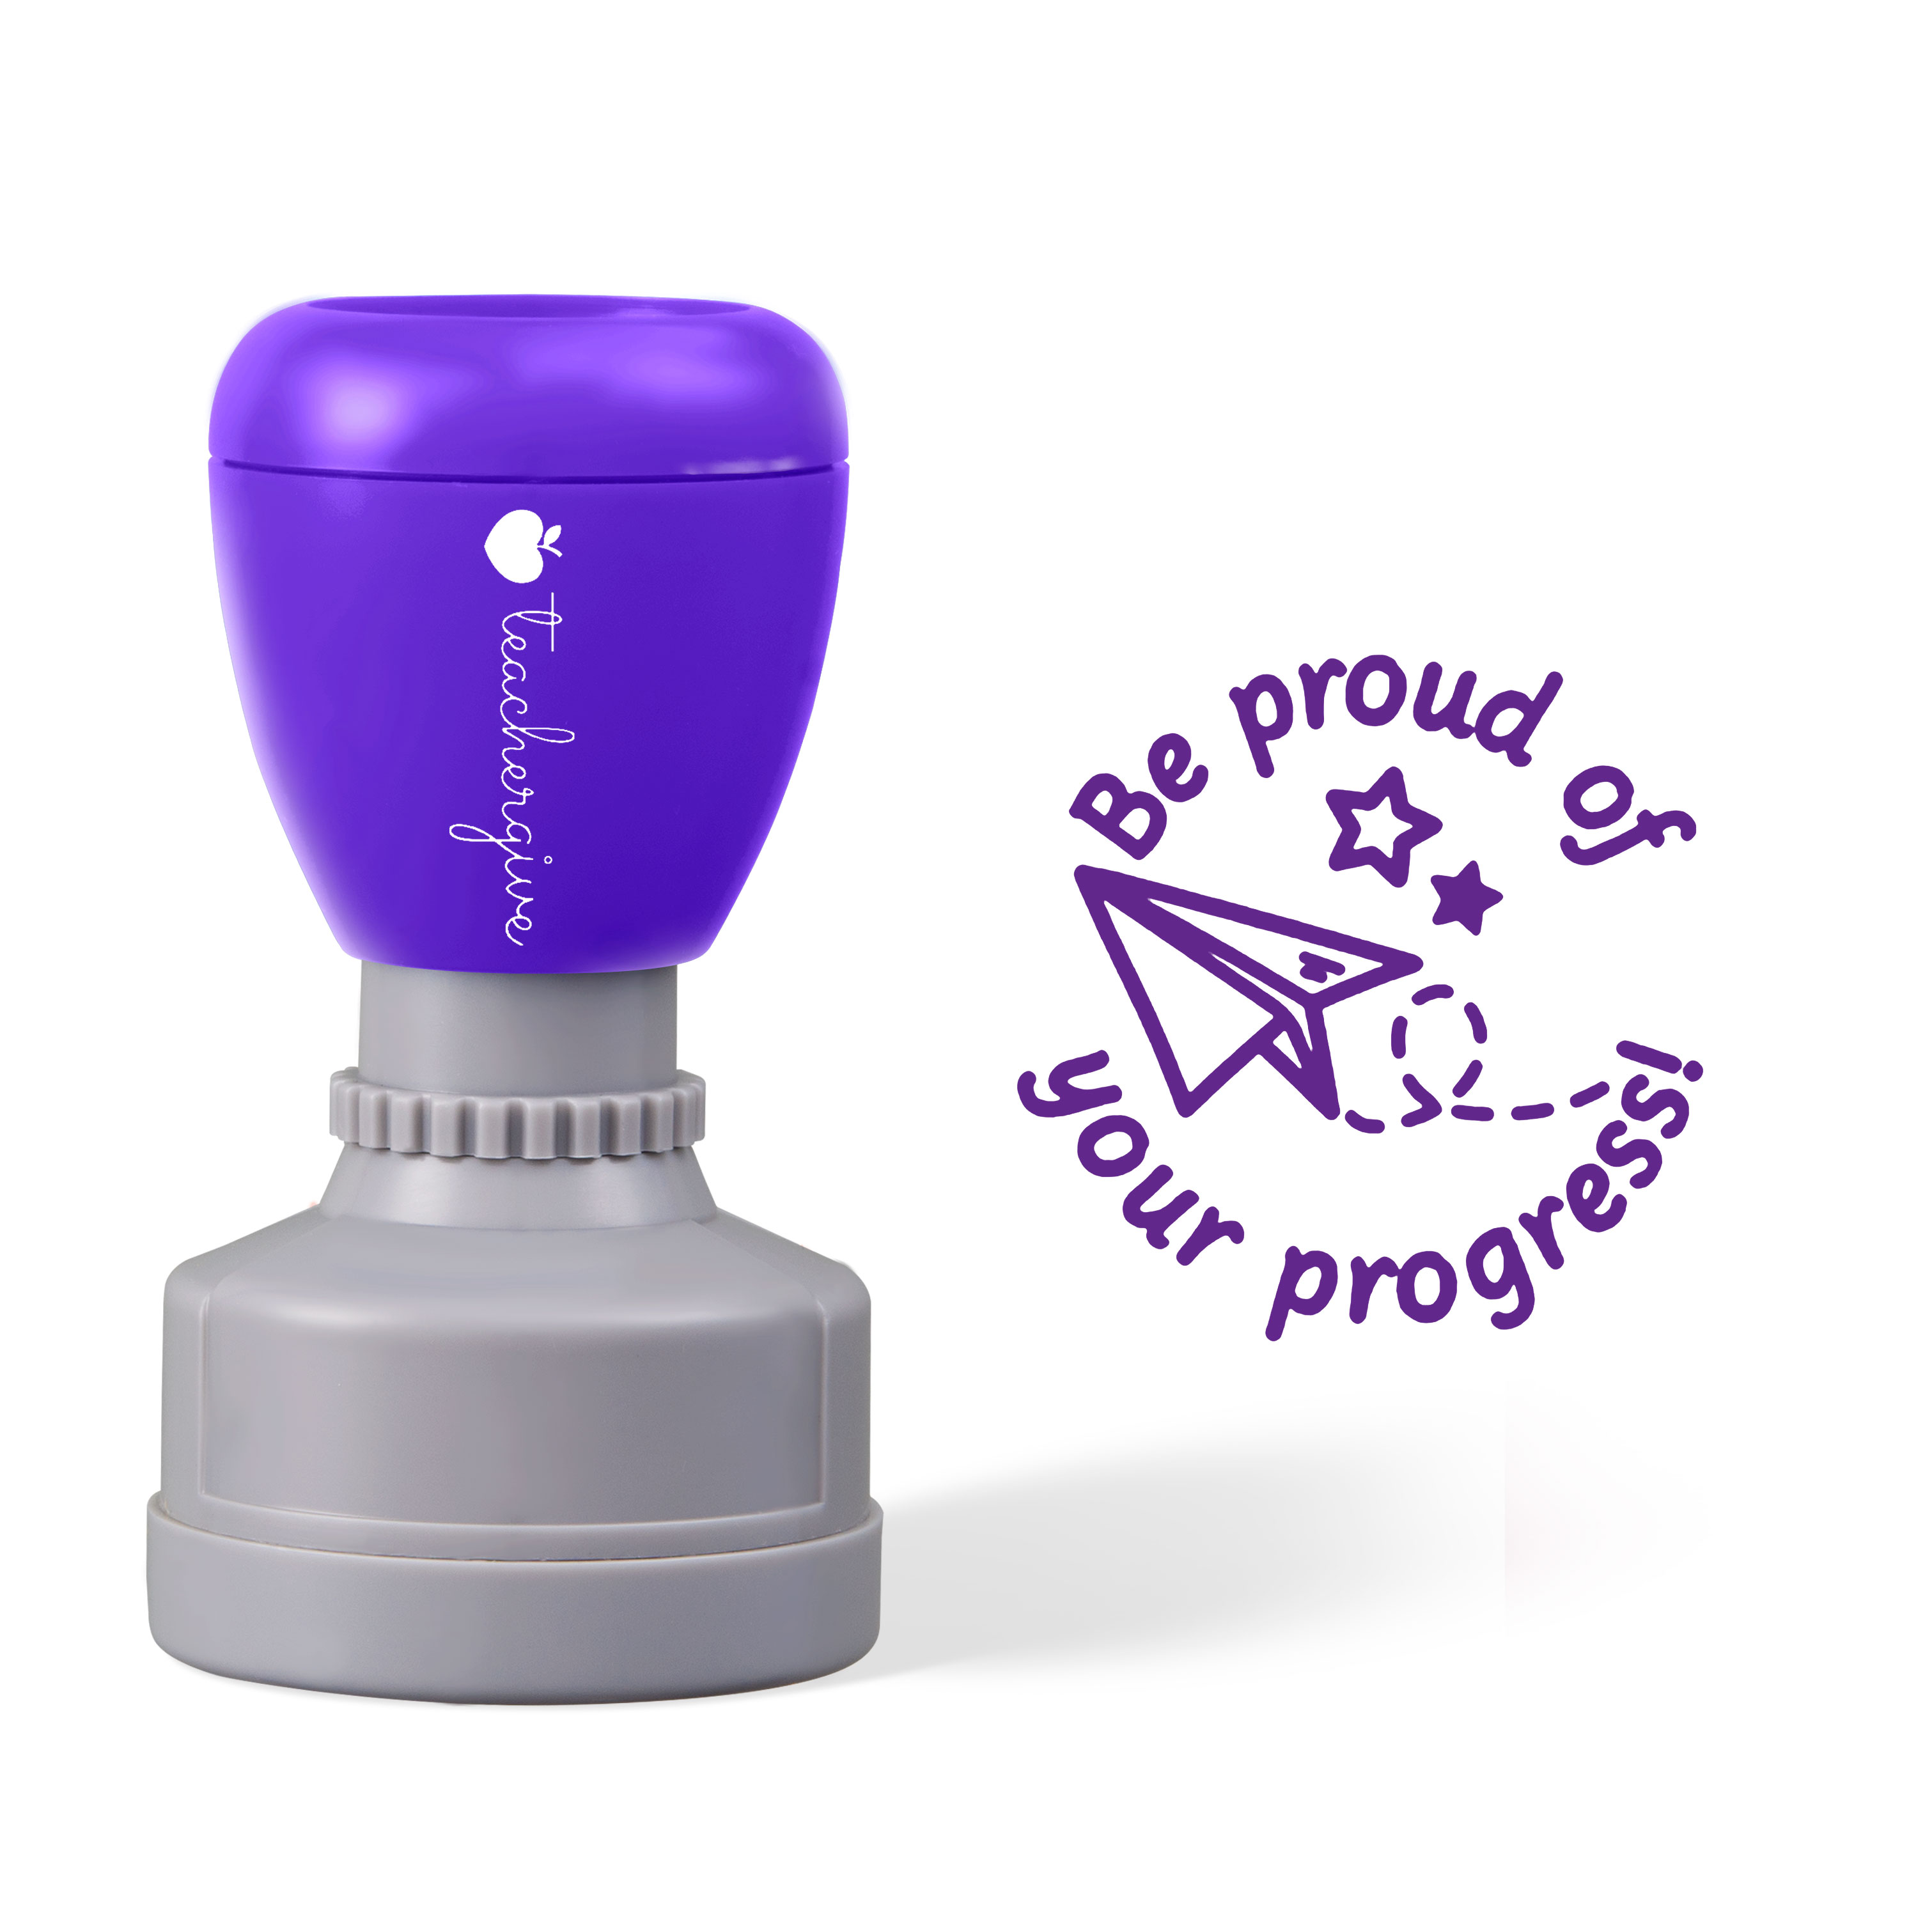 Be Proud Of Your Progress Star Stamp